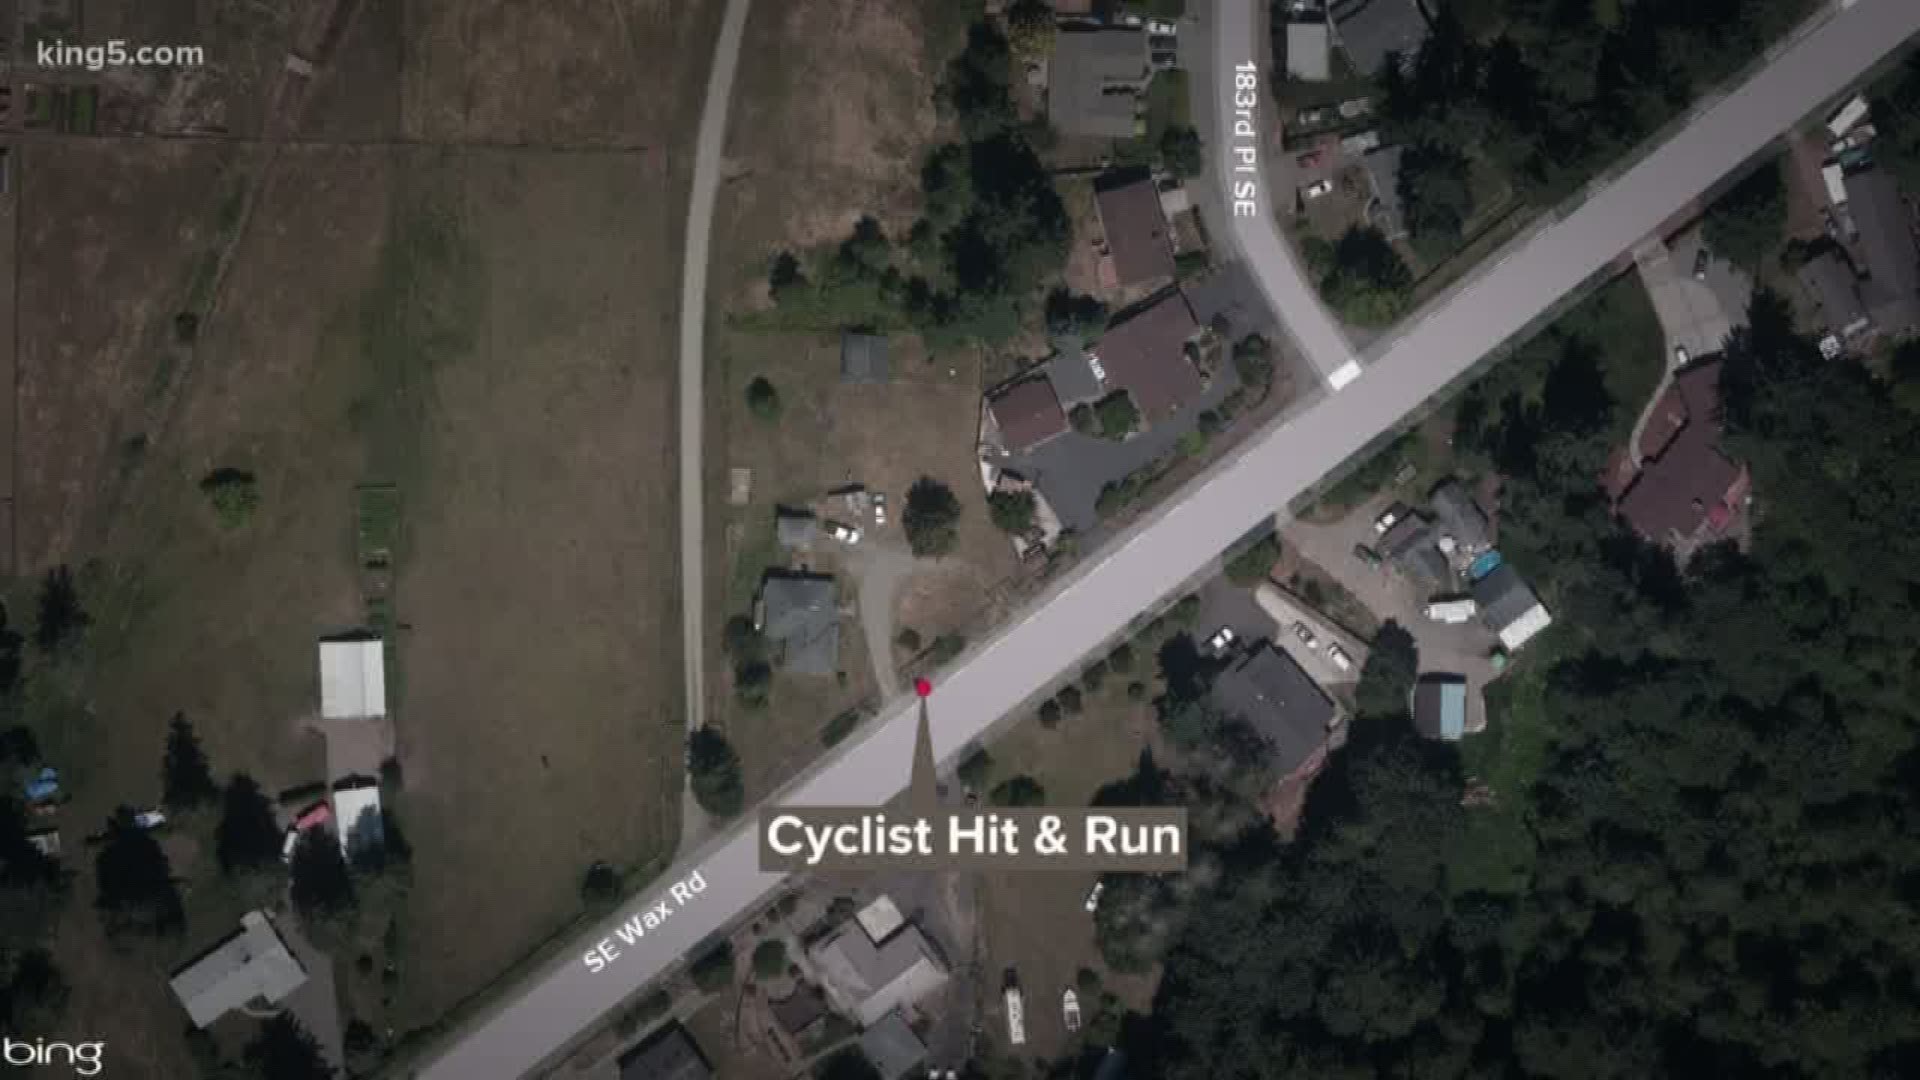 The King County Sheriff's Office is looking for a driver involved in a deadly hit and run involving a bicyclist in Covington.